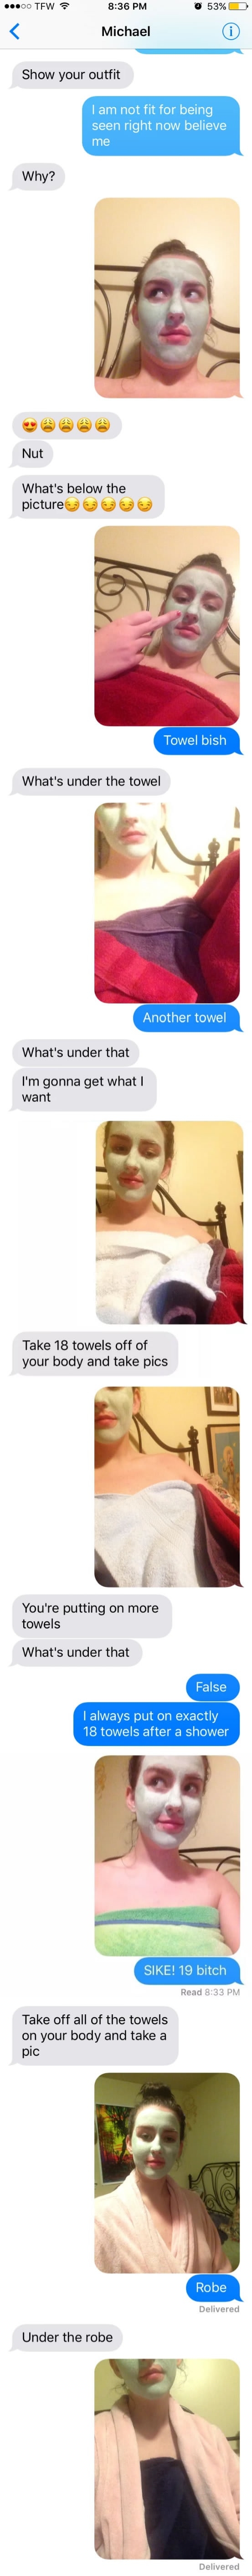 Teen roasts friend who tried to pressure her into sending n*des